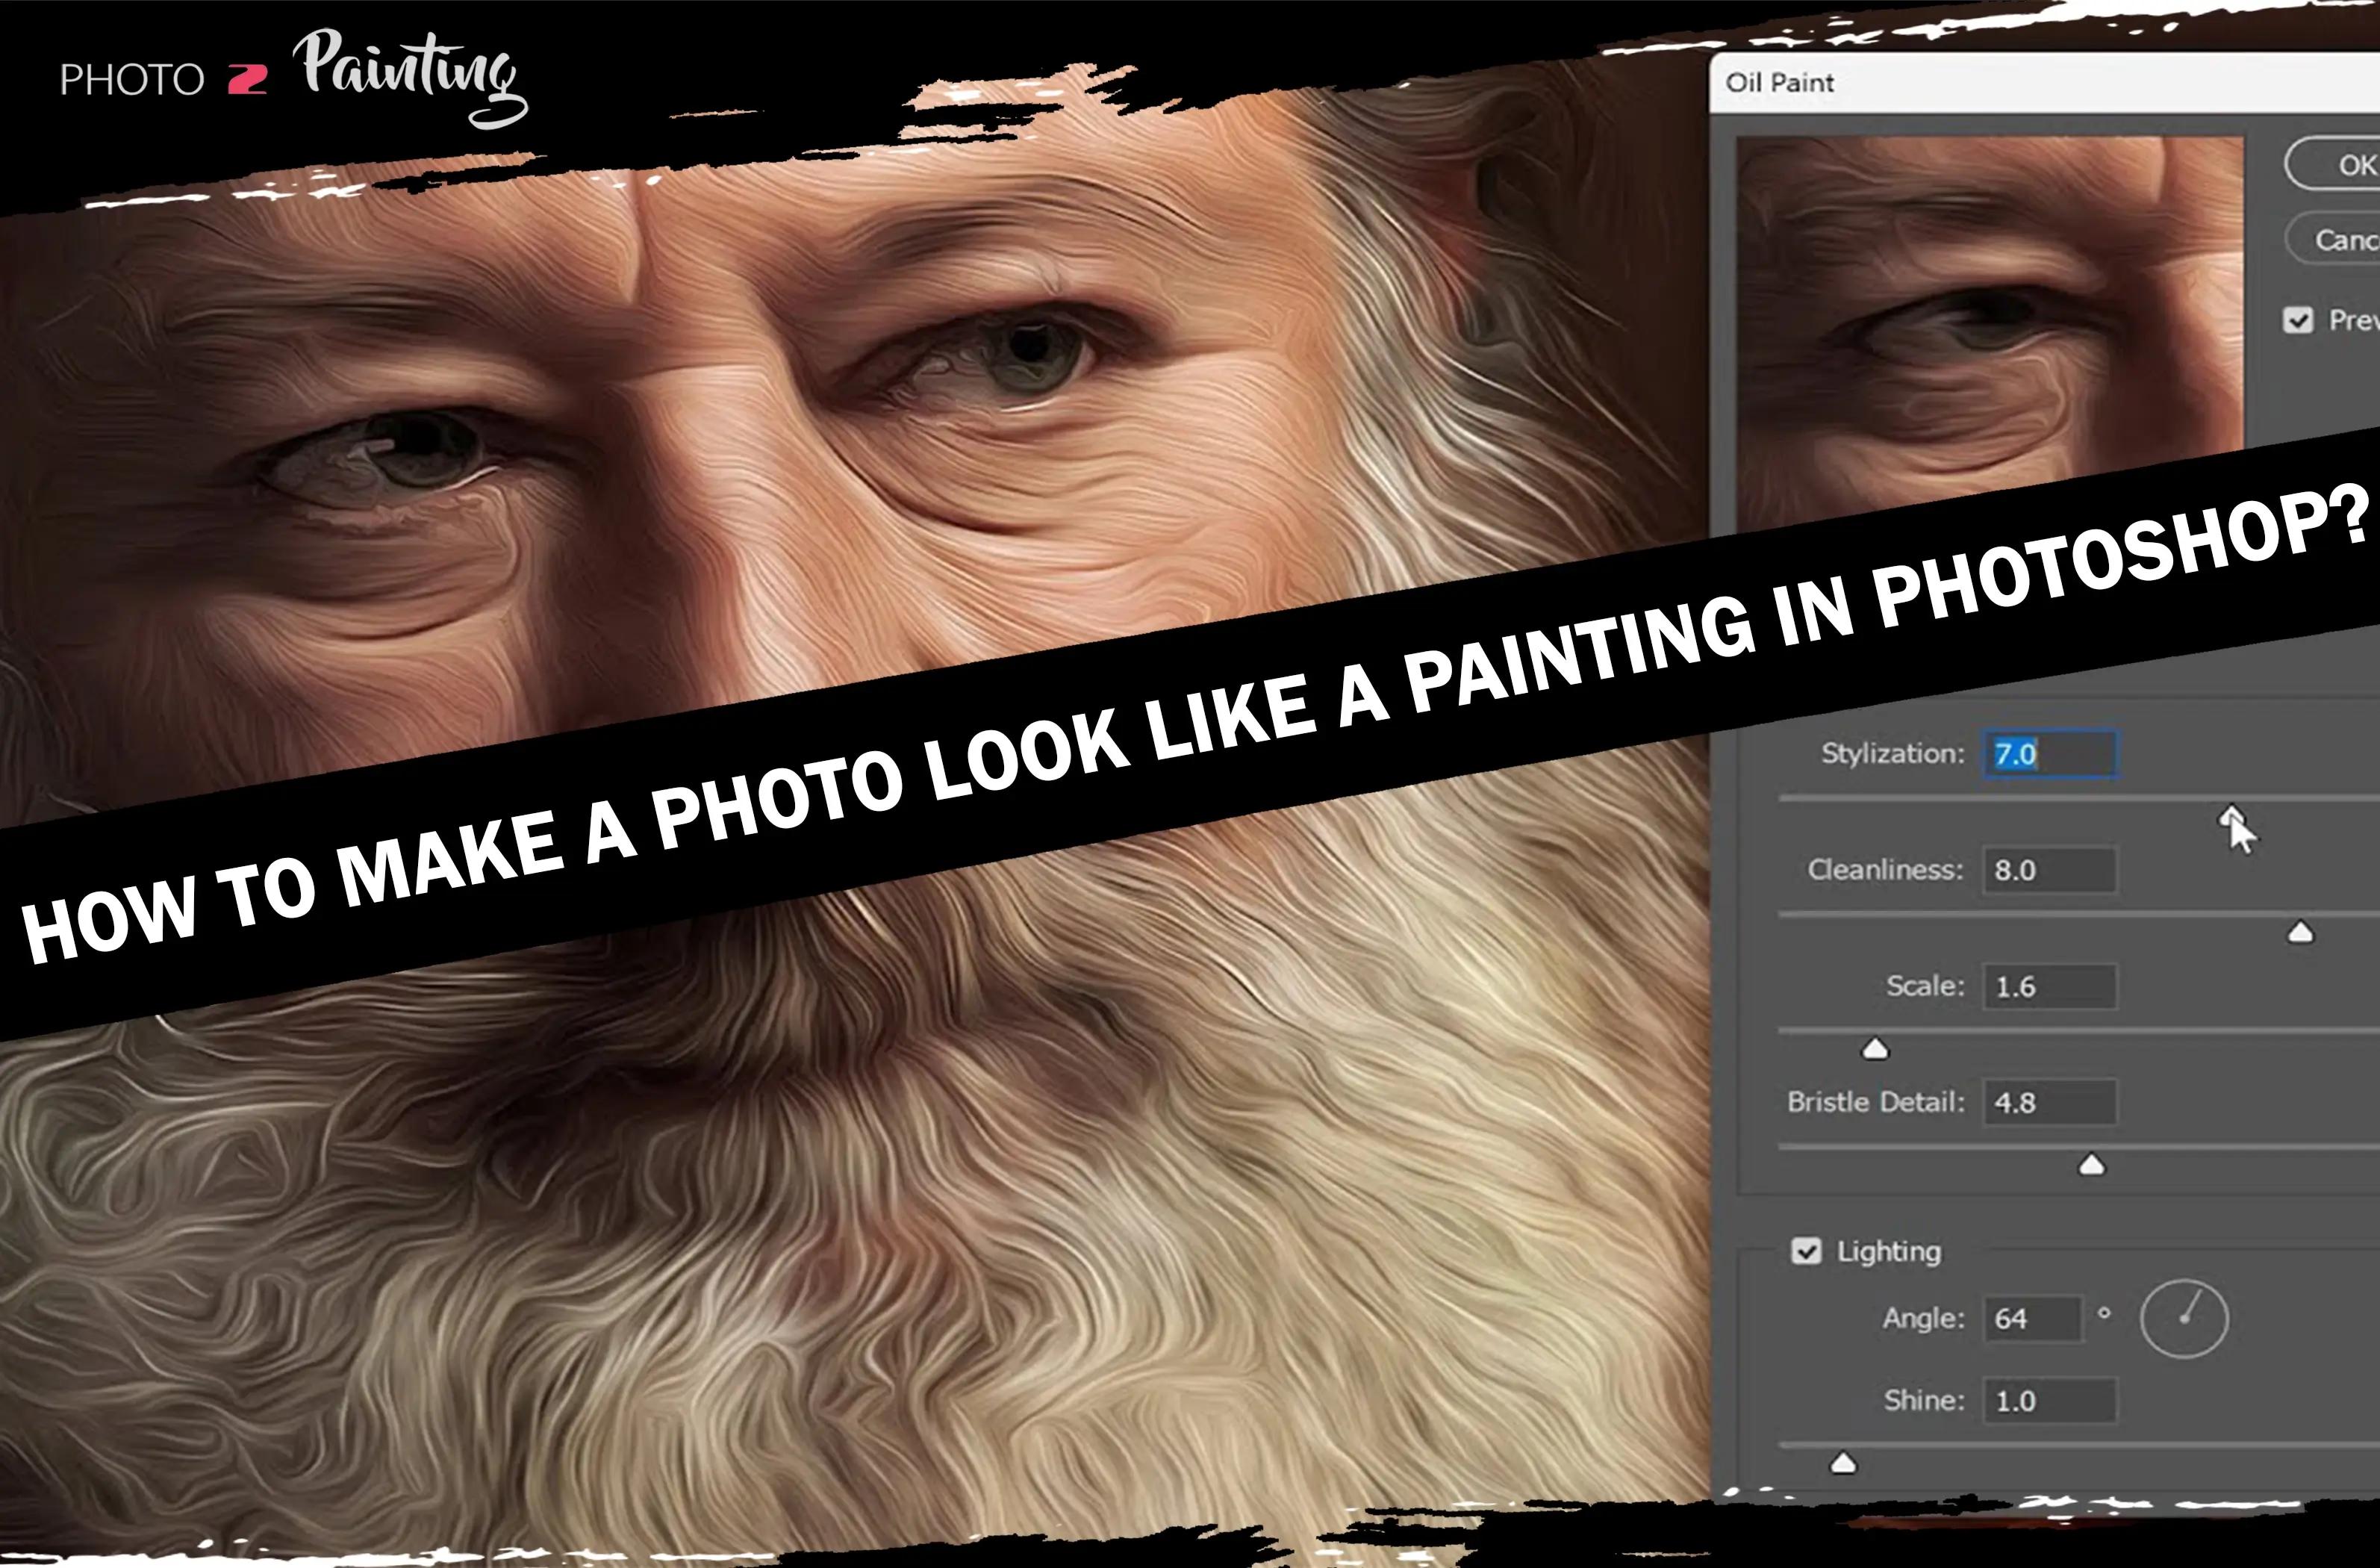 How to make a photo look like a painting in Photoshop? Step-by-step process